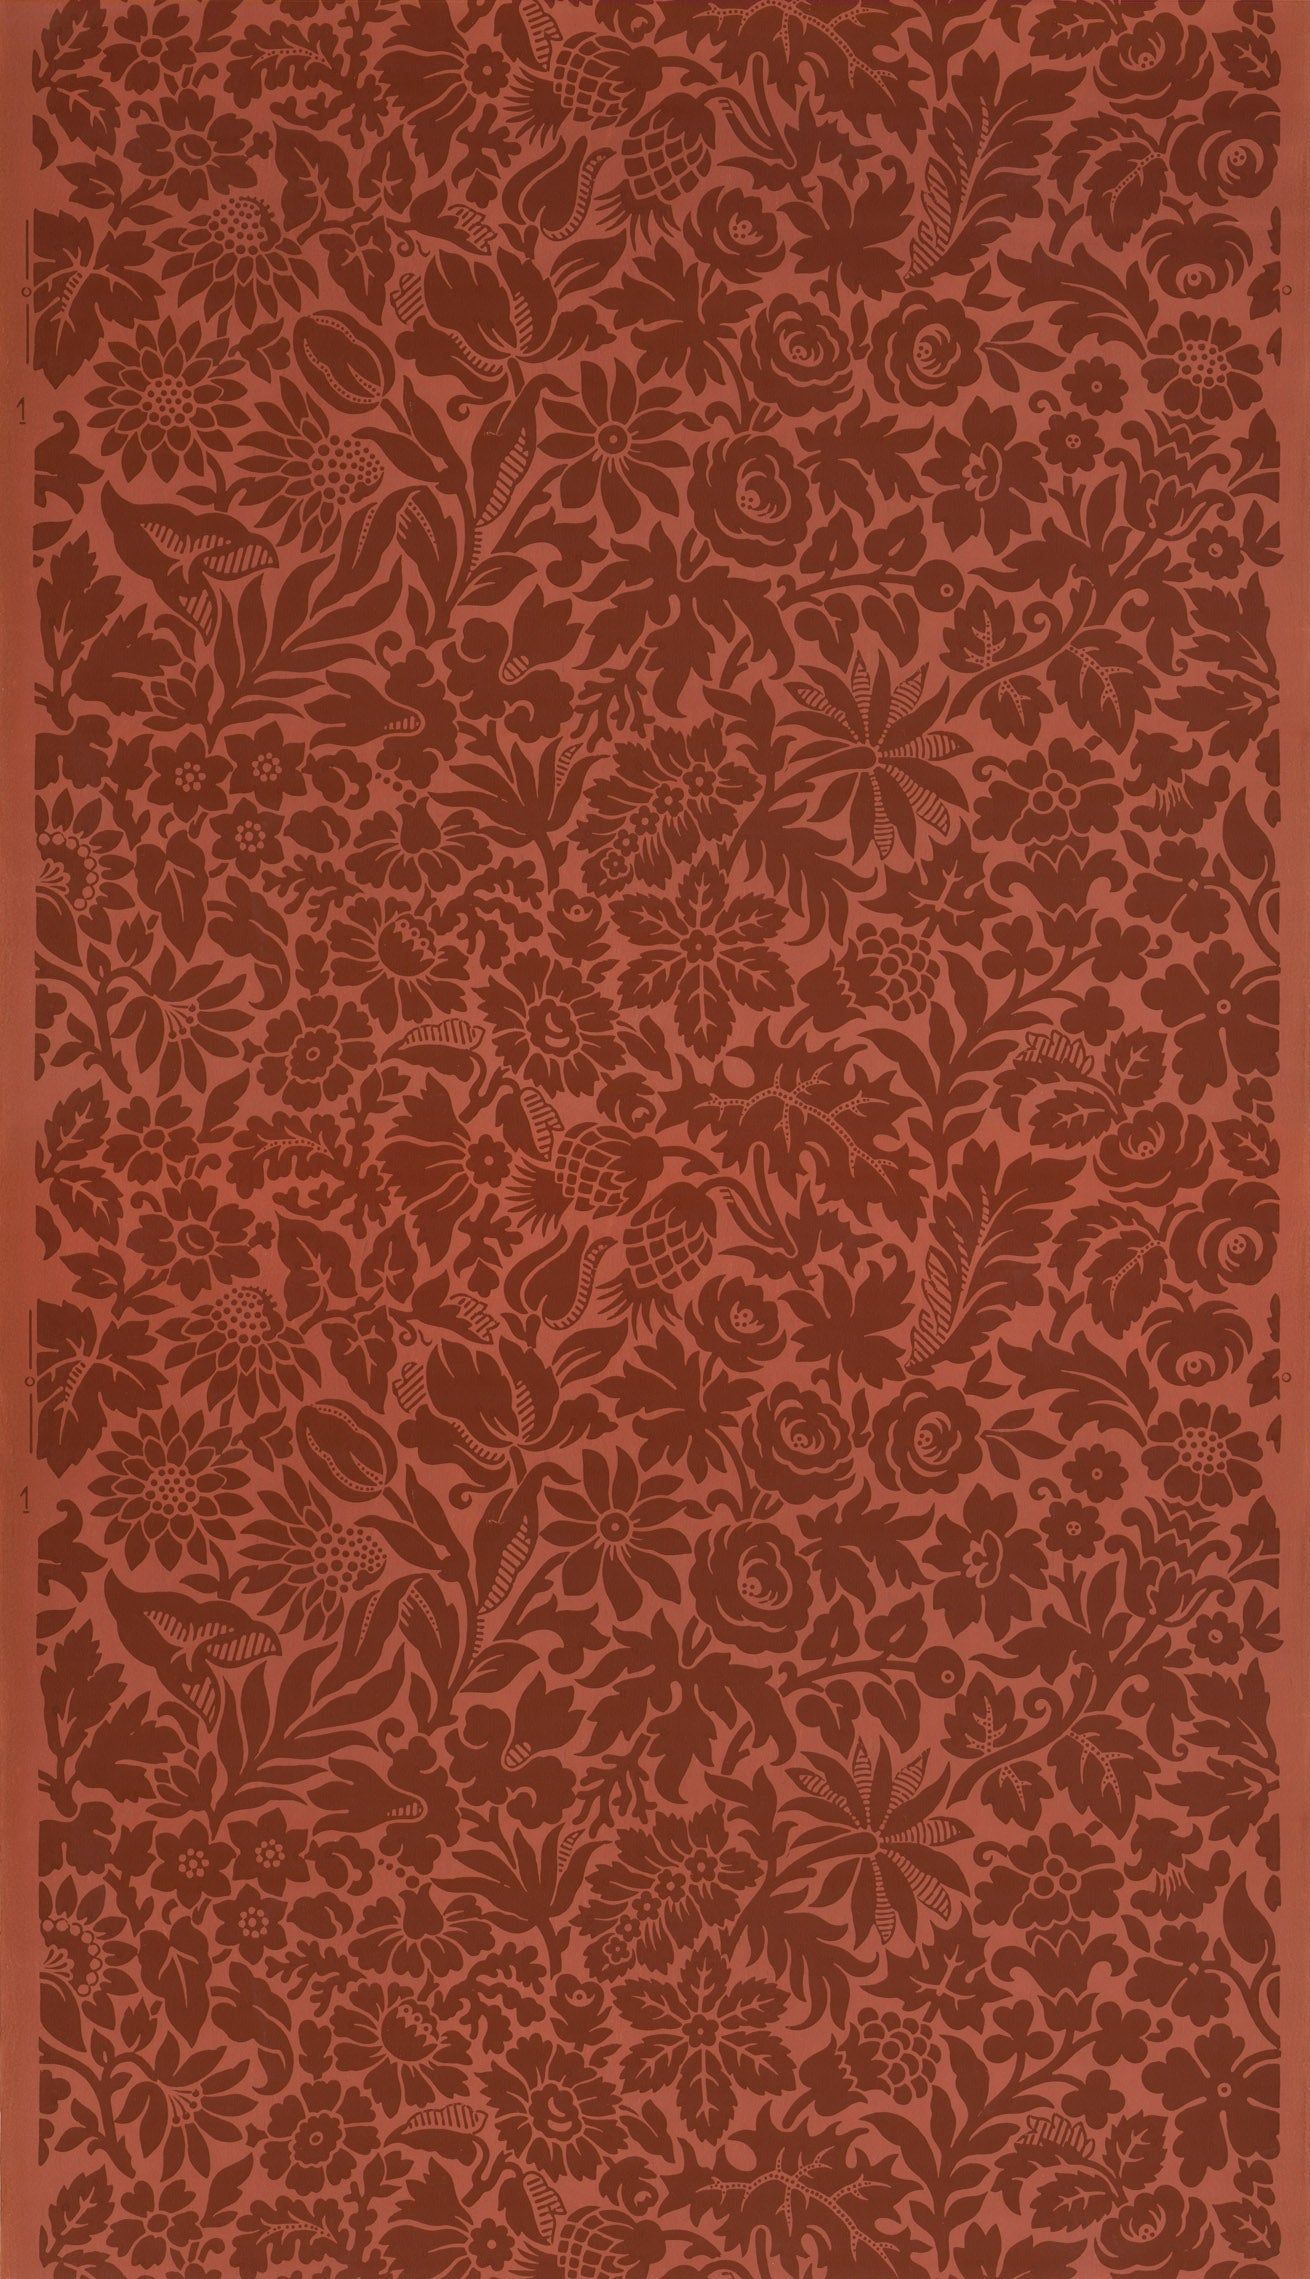 Brown wallpaper with a repeating pattern of flowers, leaves, and birds - Salmon